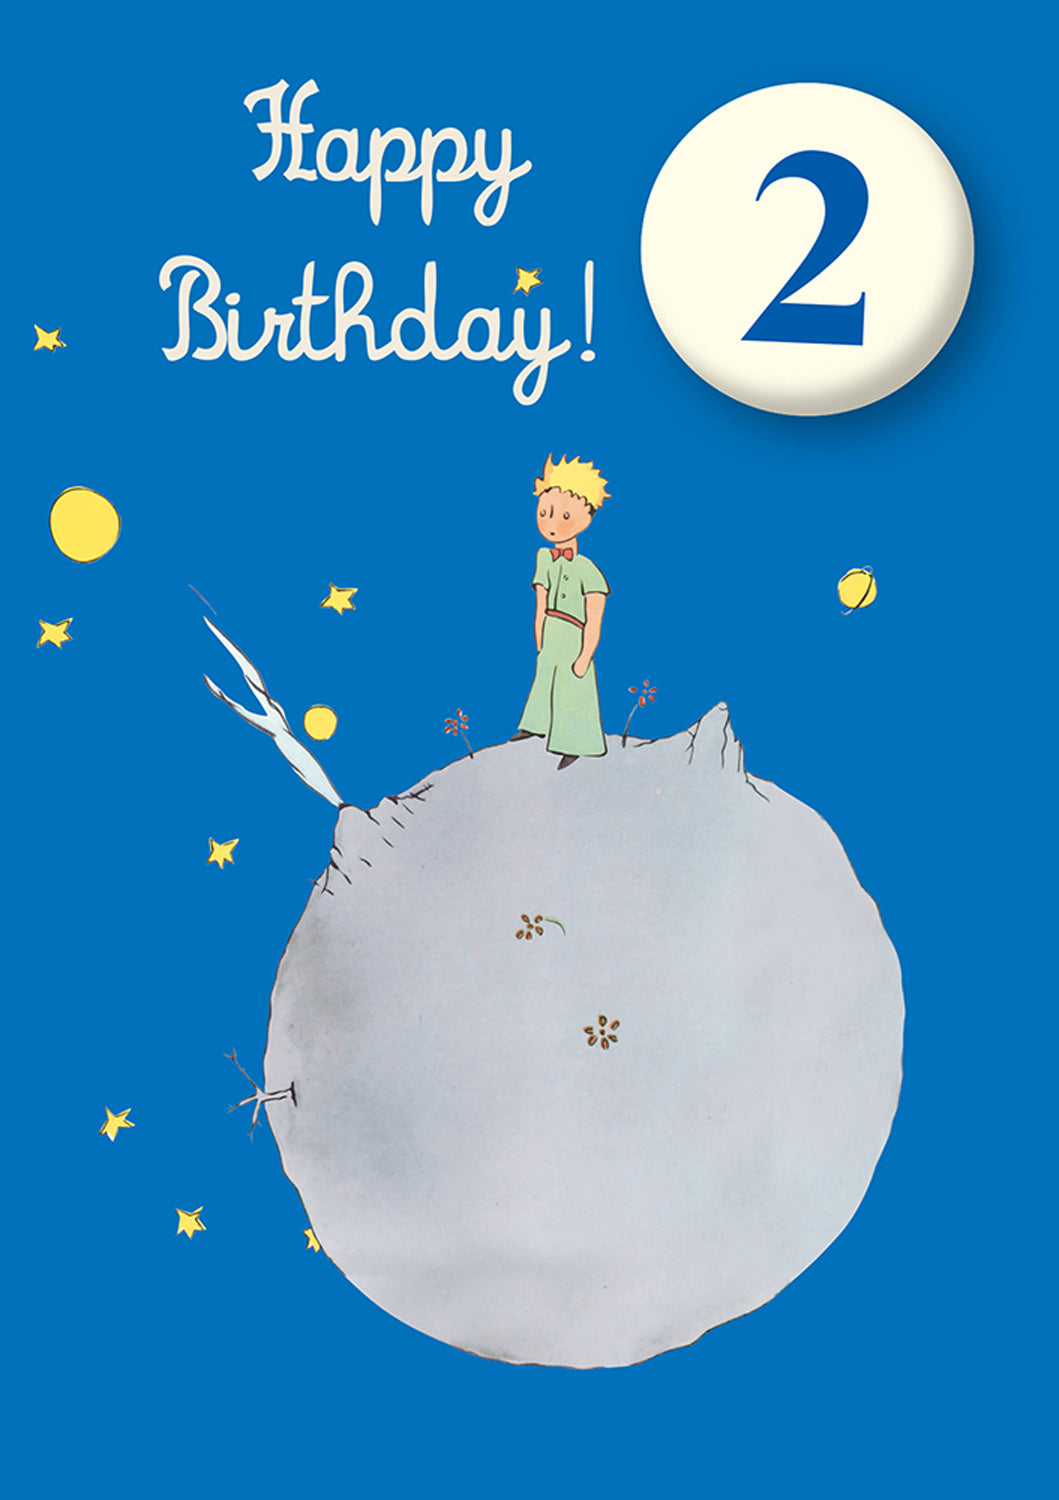 Greeting Card: The Little Prince - Happy Birthday Age 2 Badge